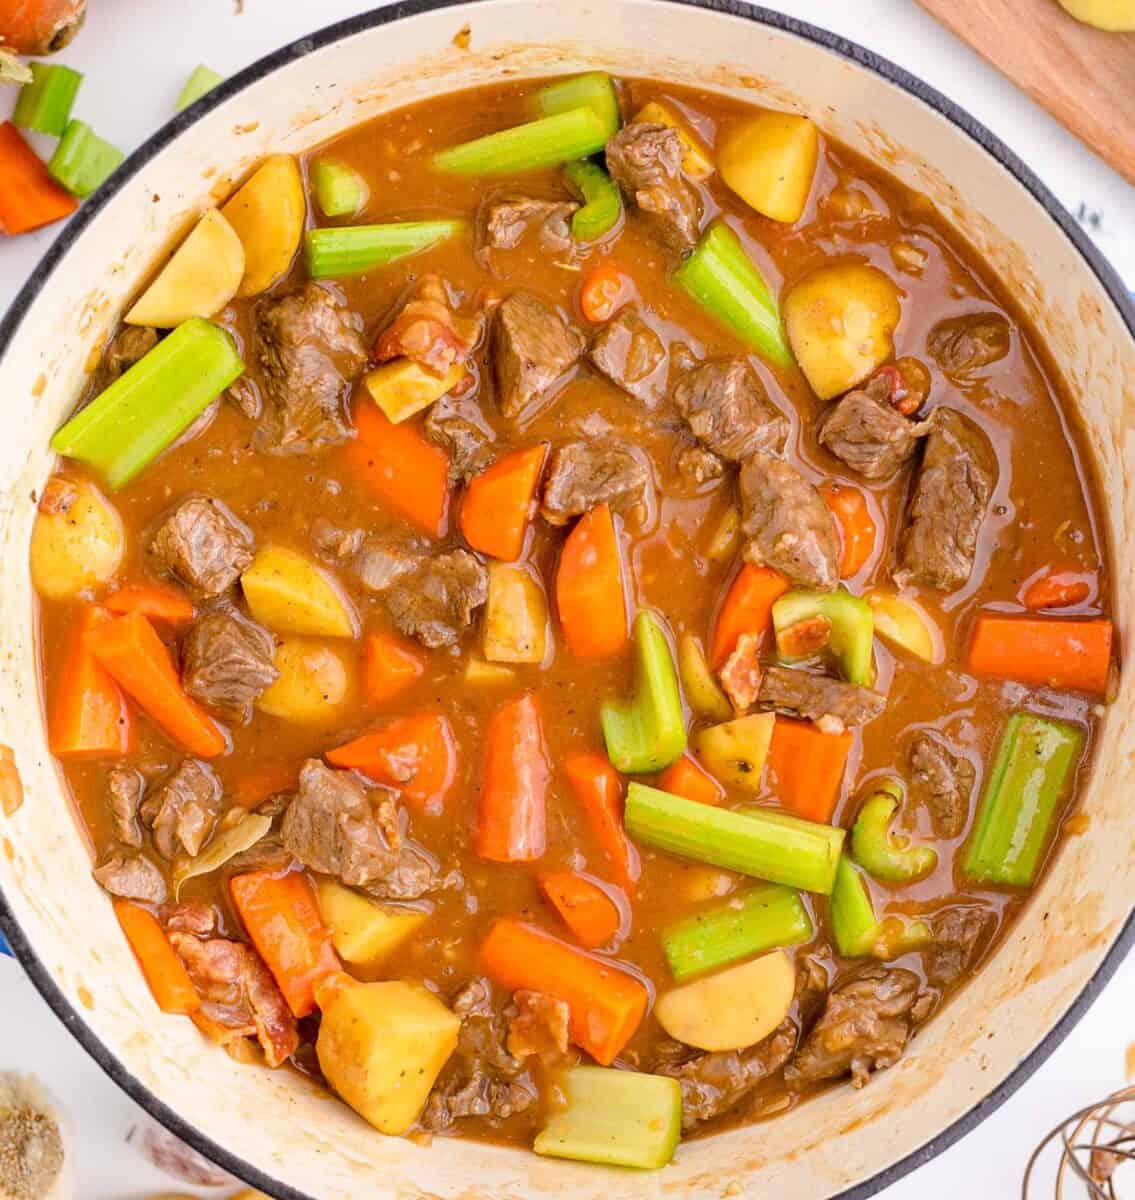 ingredients for guinness beef stew stirred together in a cast iron skillet